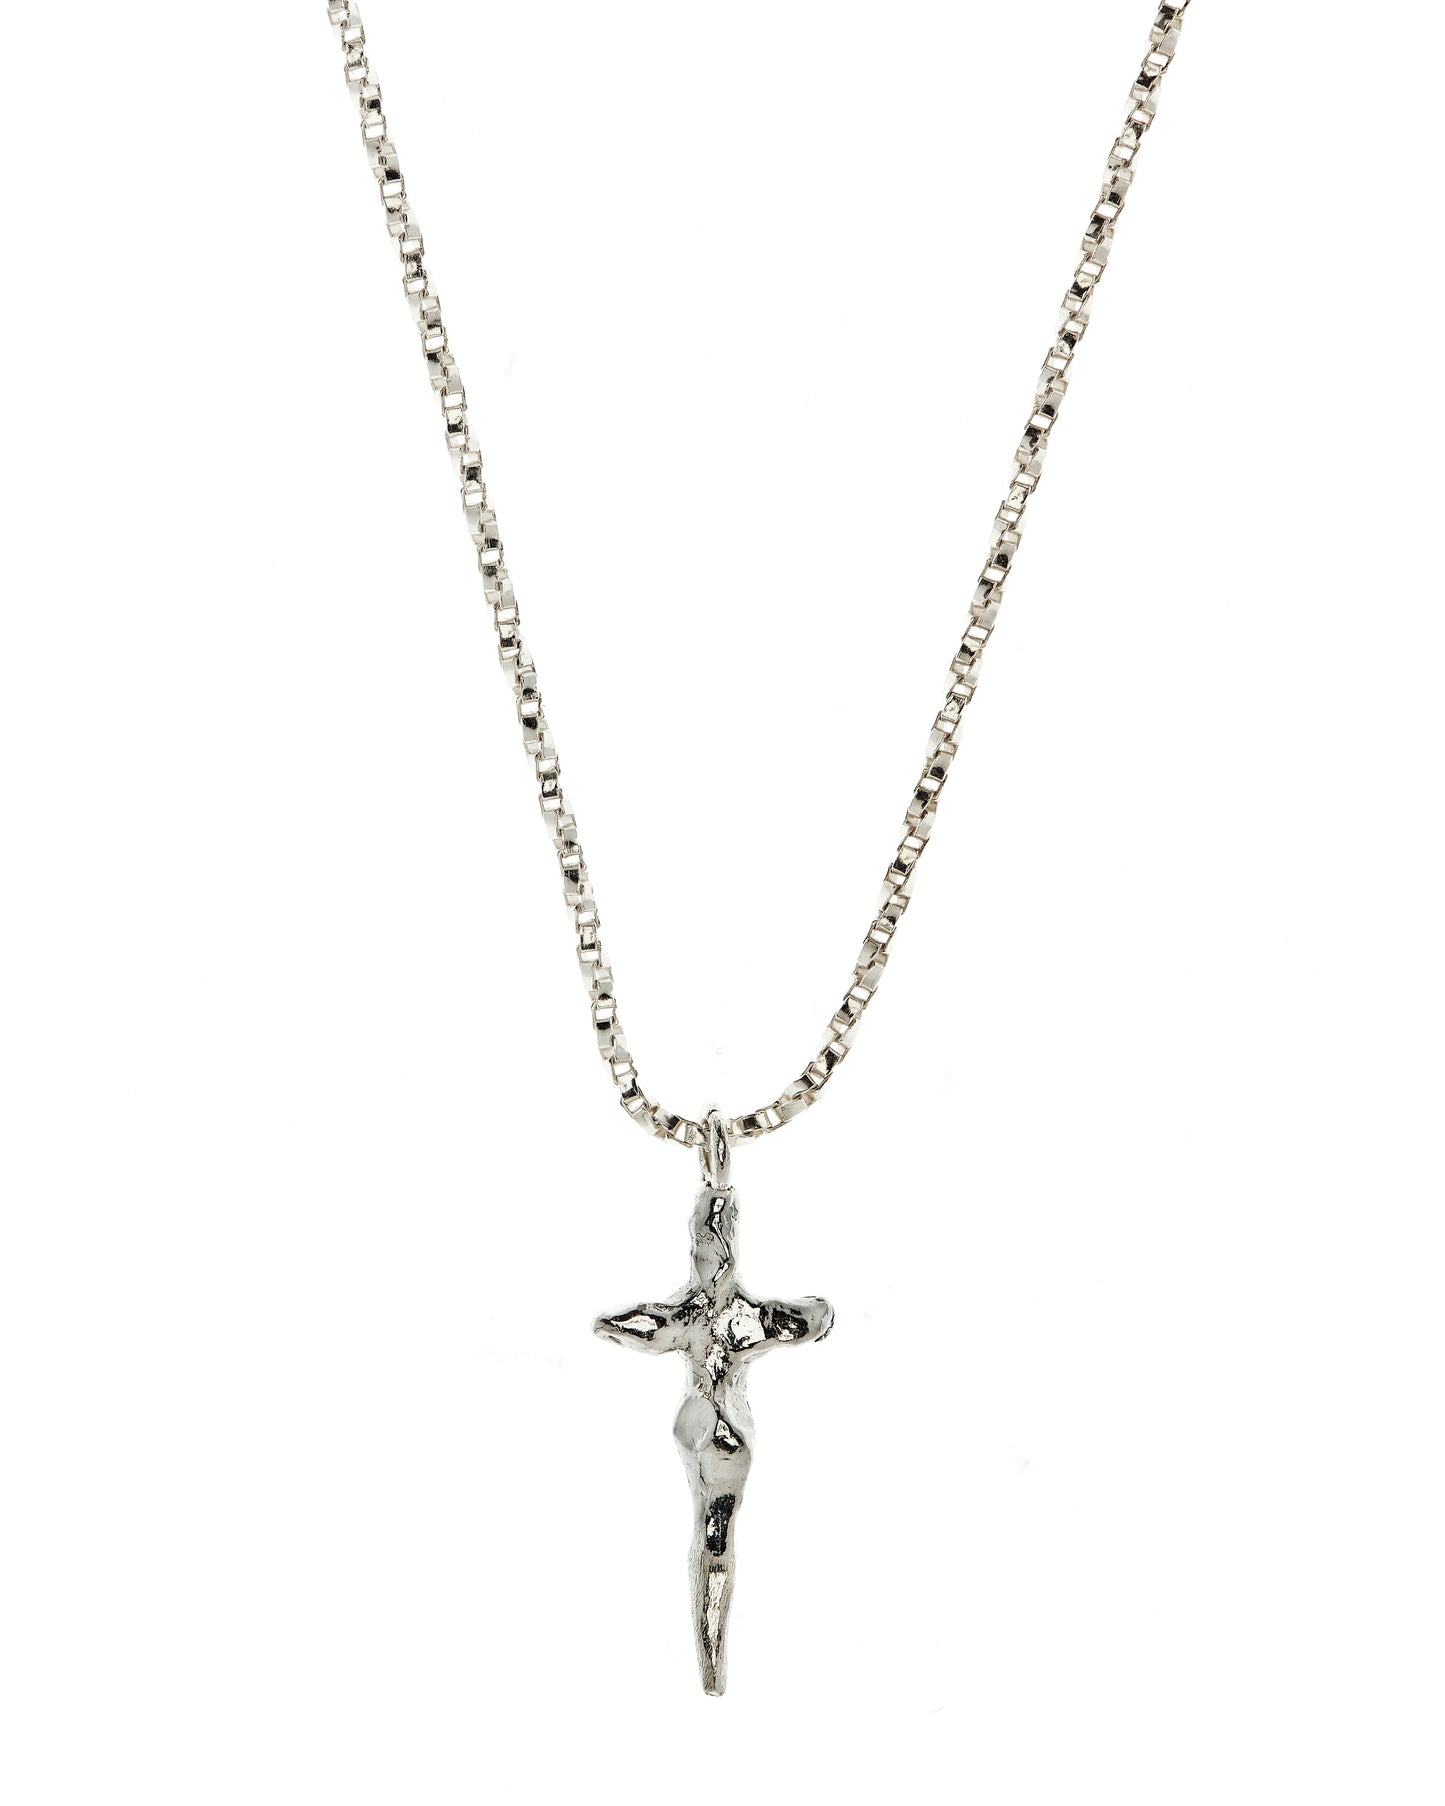 Crucifix Necklace in Sterling Silver